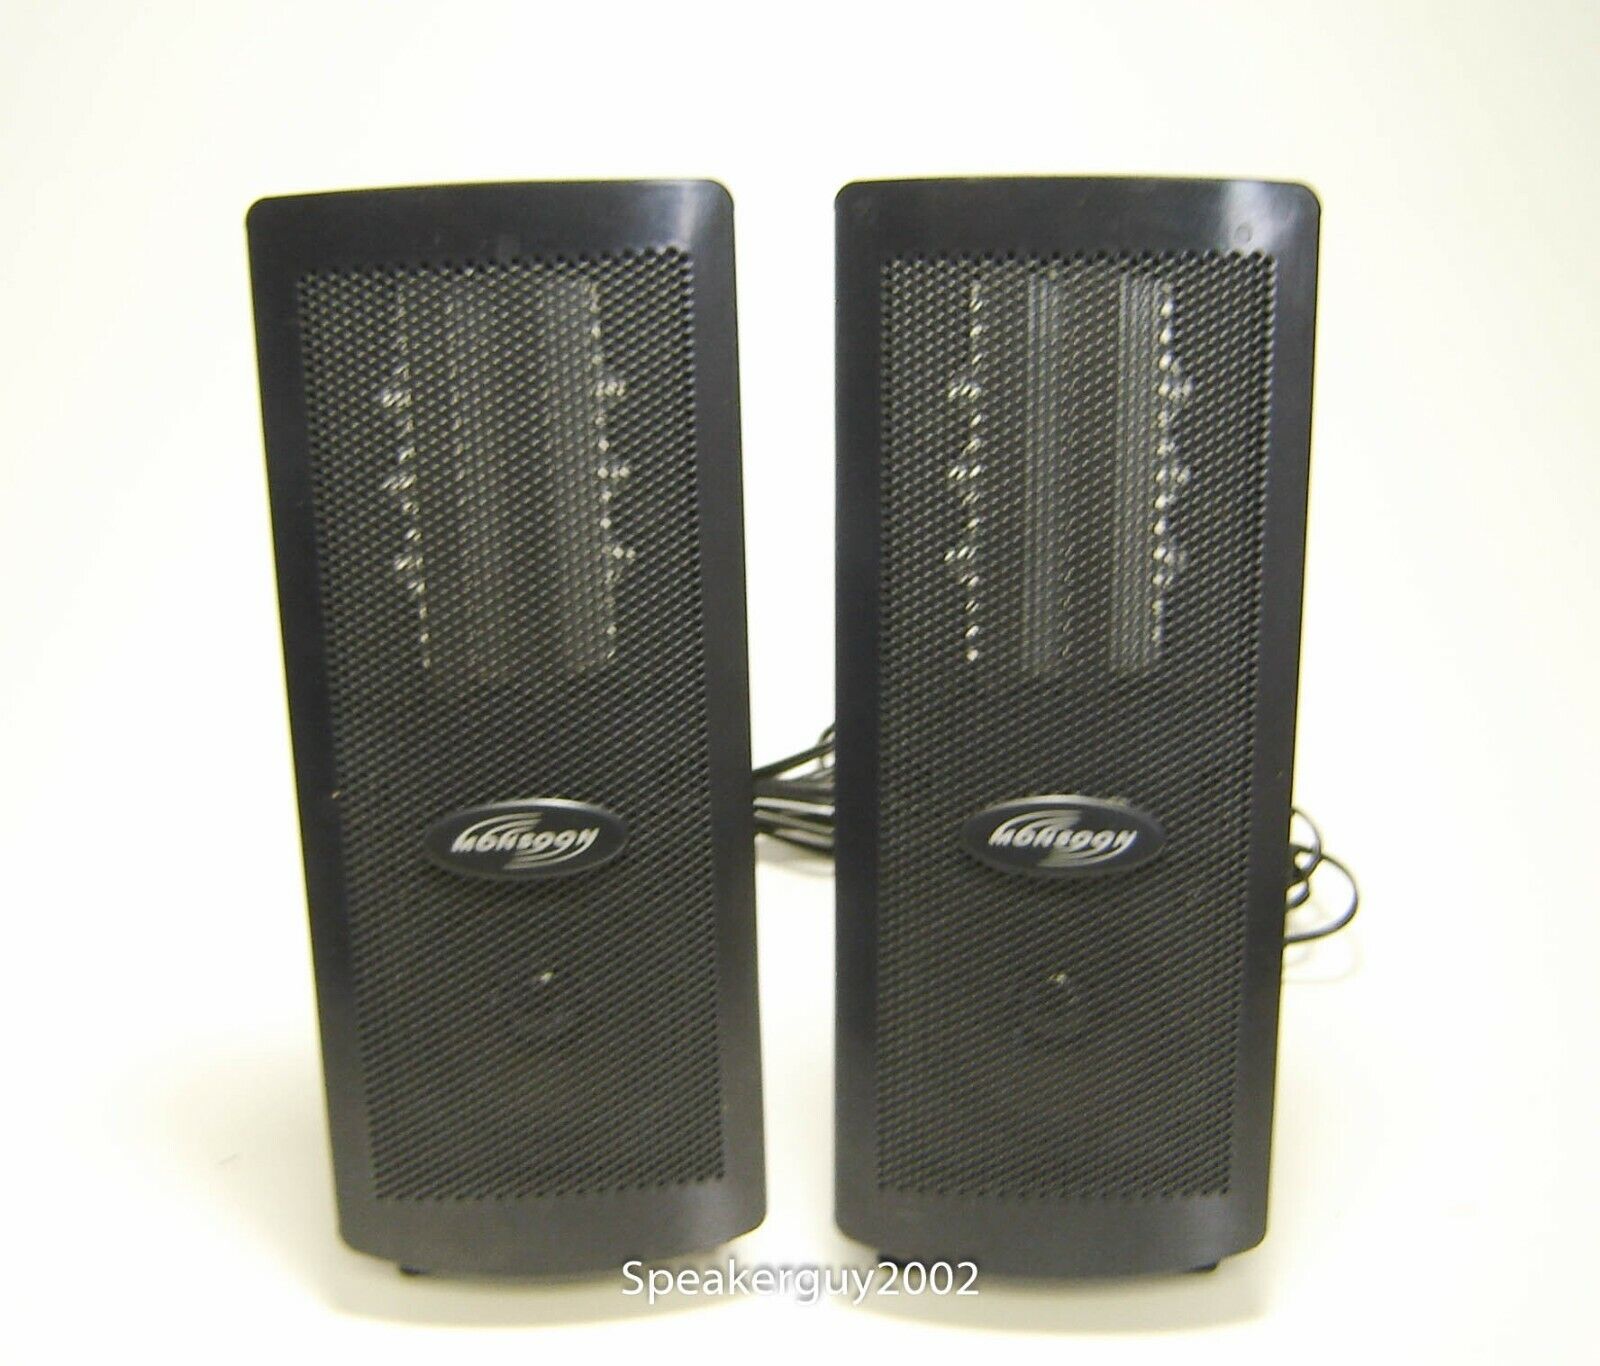 Pair of Monsoon Satellite speakers / MH-500 / No Subwoofer - KT